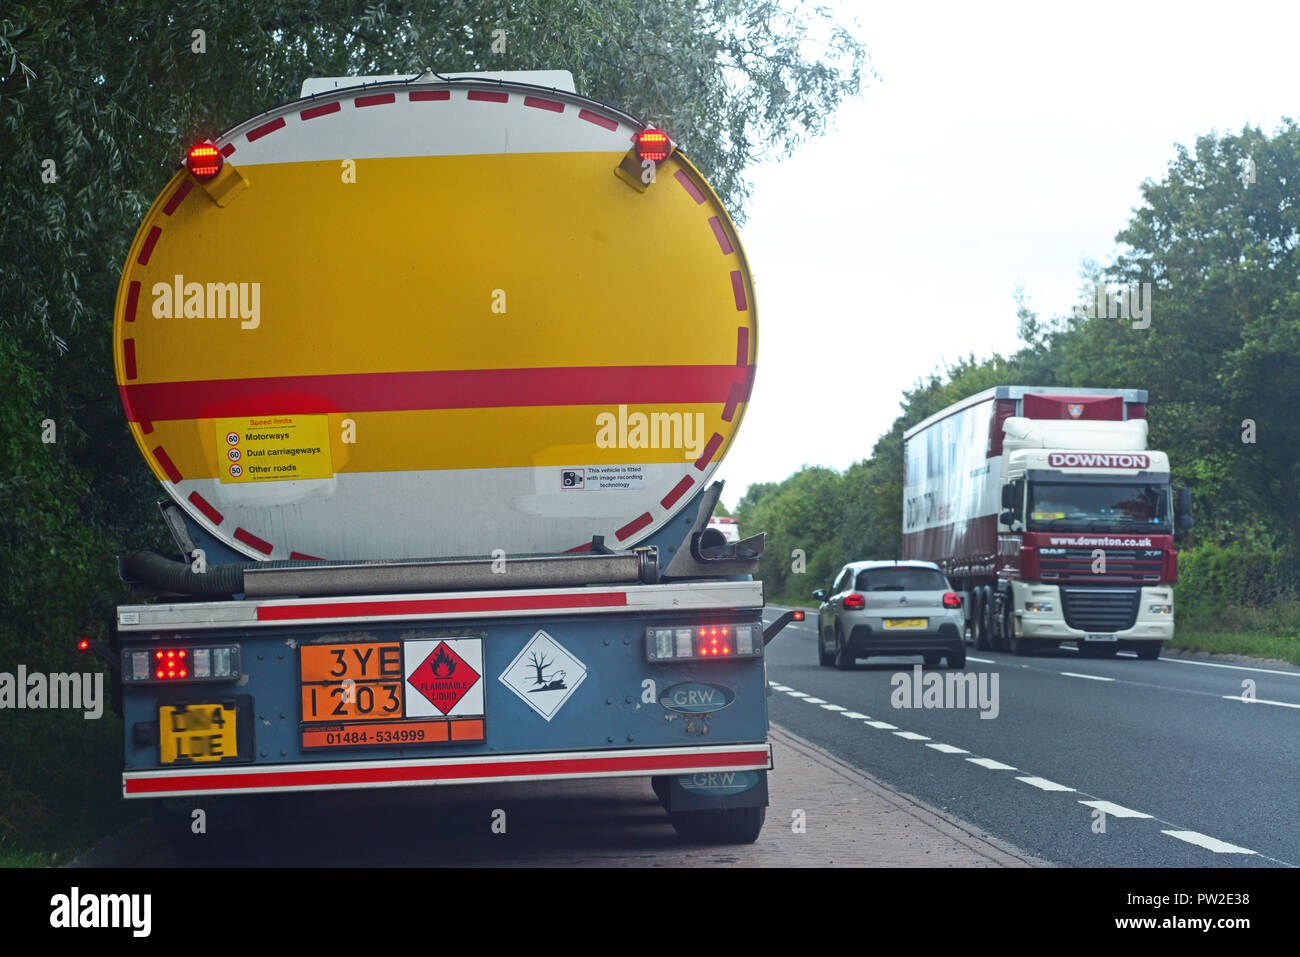 load identification plate on heavy goods vehicle in lay by denoting transportation of flammable liquid uk Stock Photo